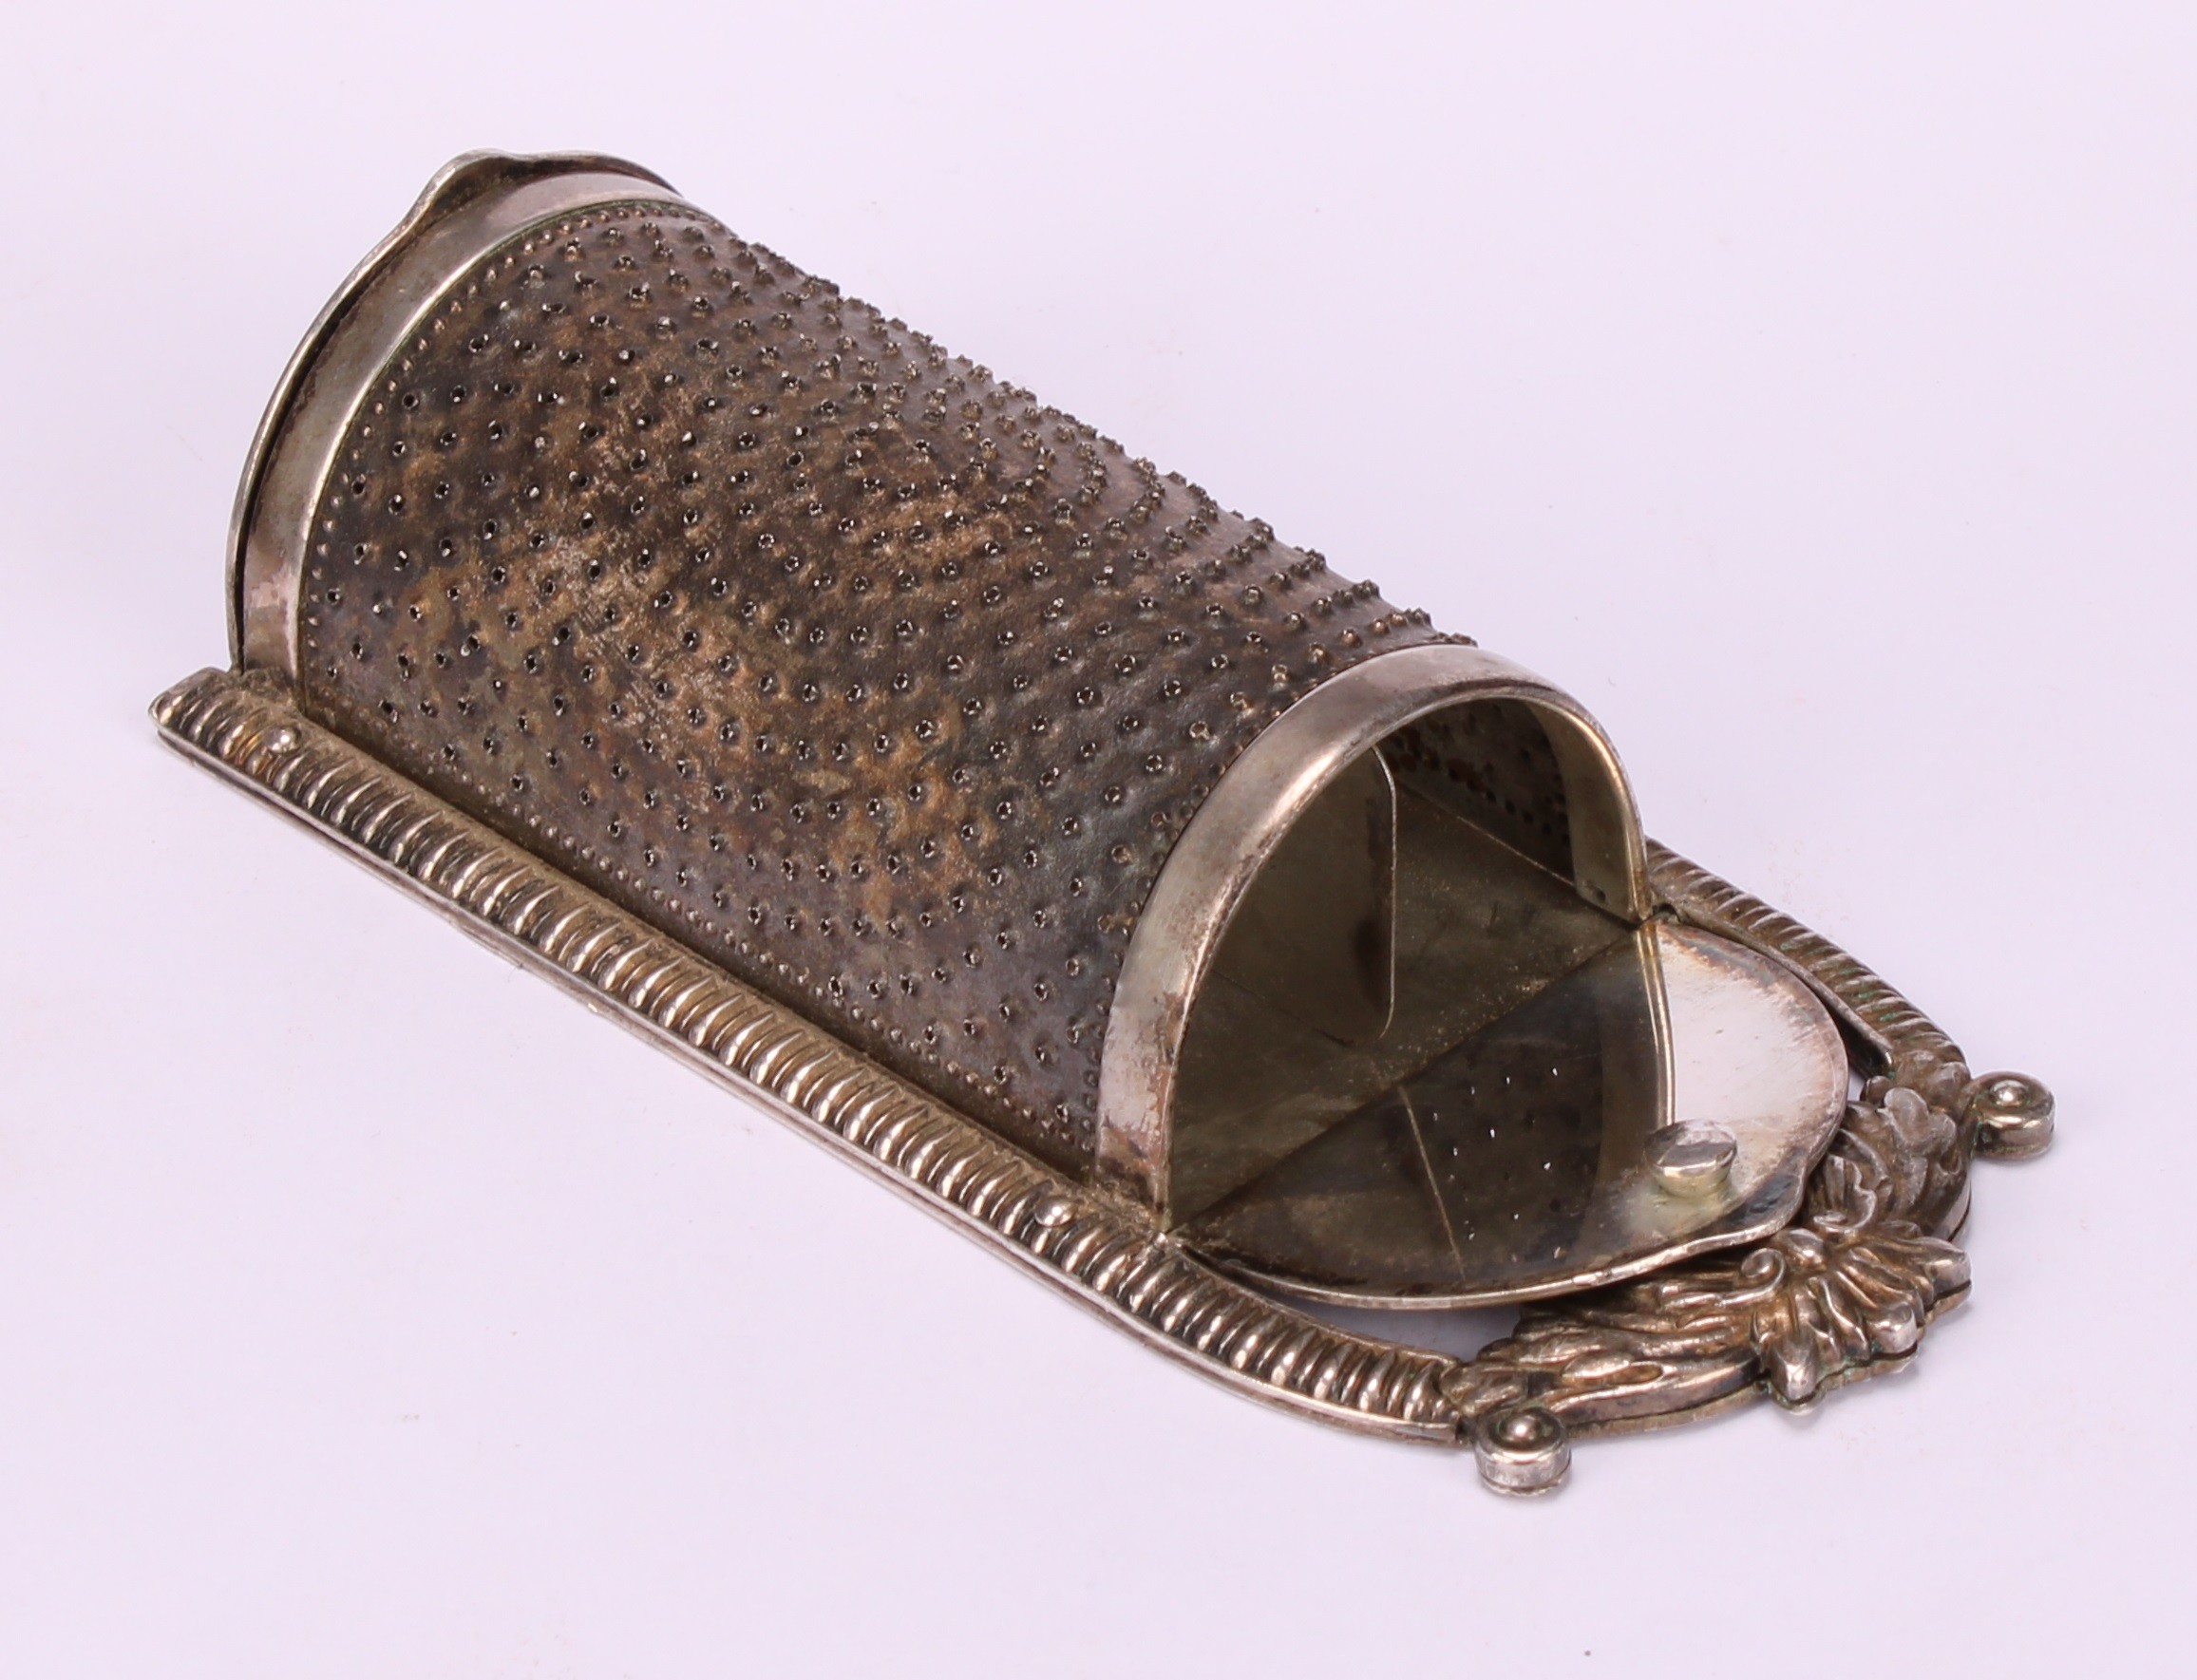 A George III style plated nutmeg grater, Dubarry Pro Patent, Rd. 765097, 10.5cm high, 20th century - Image 4 of 5